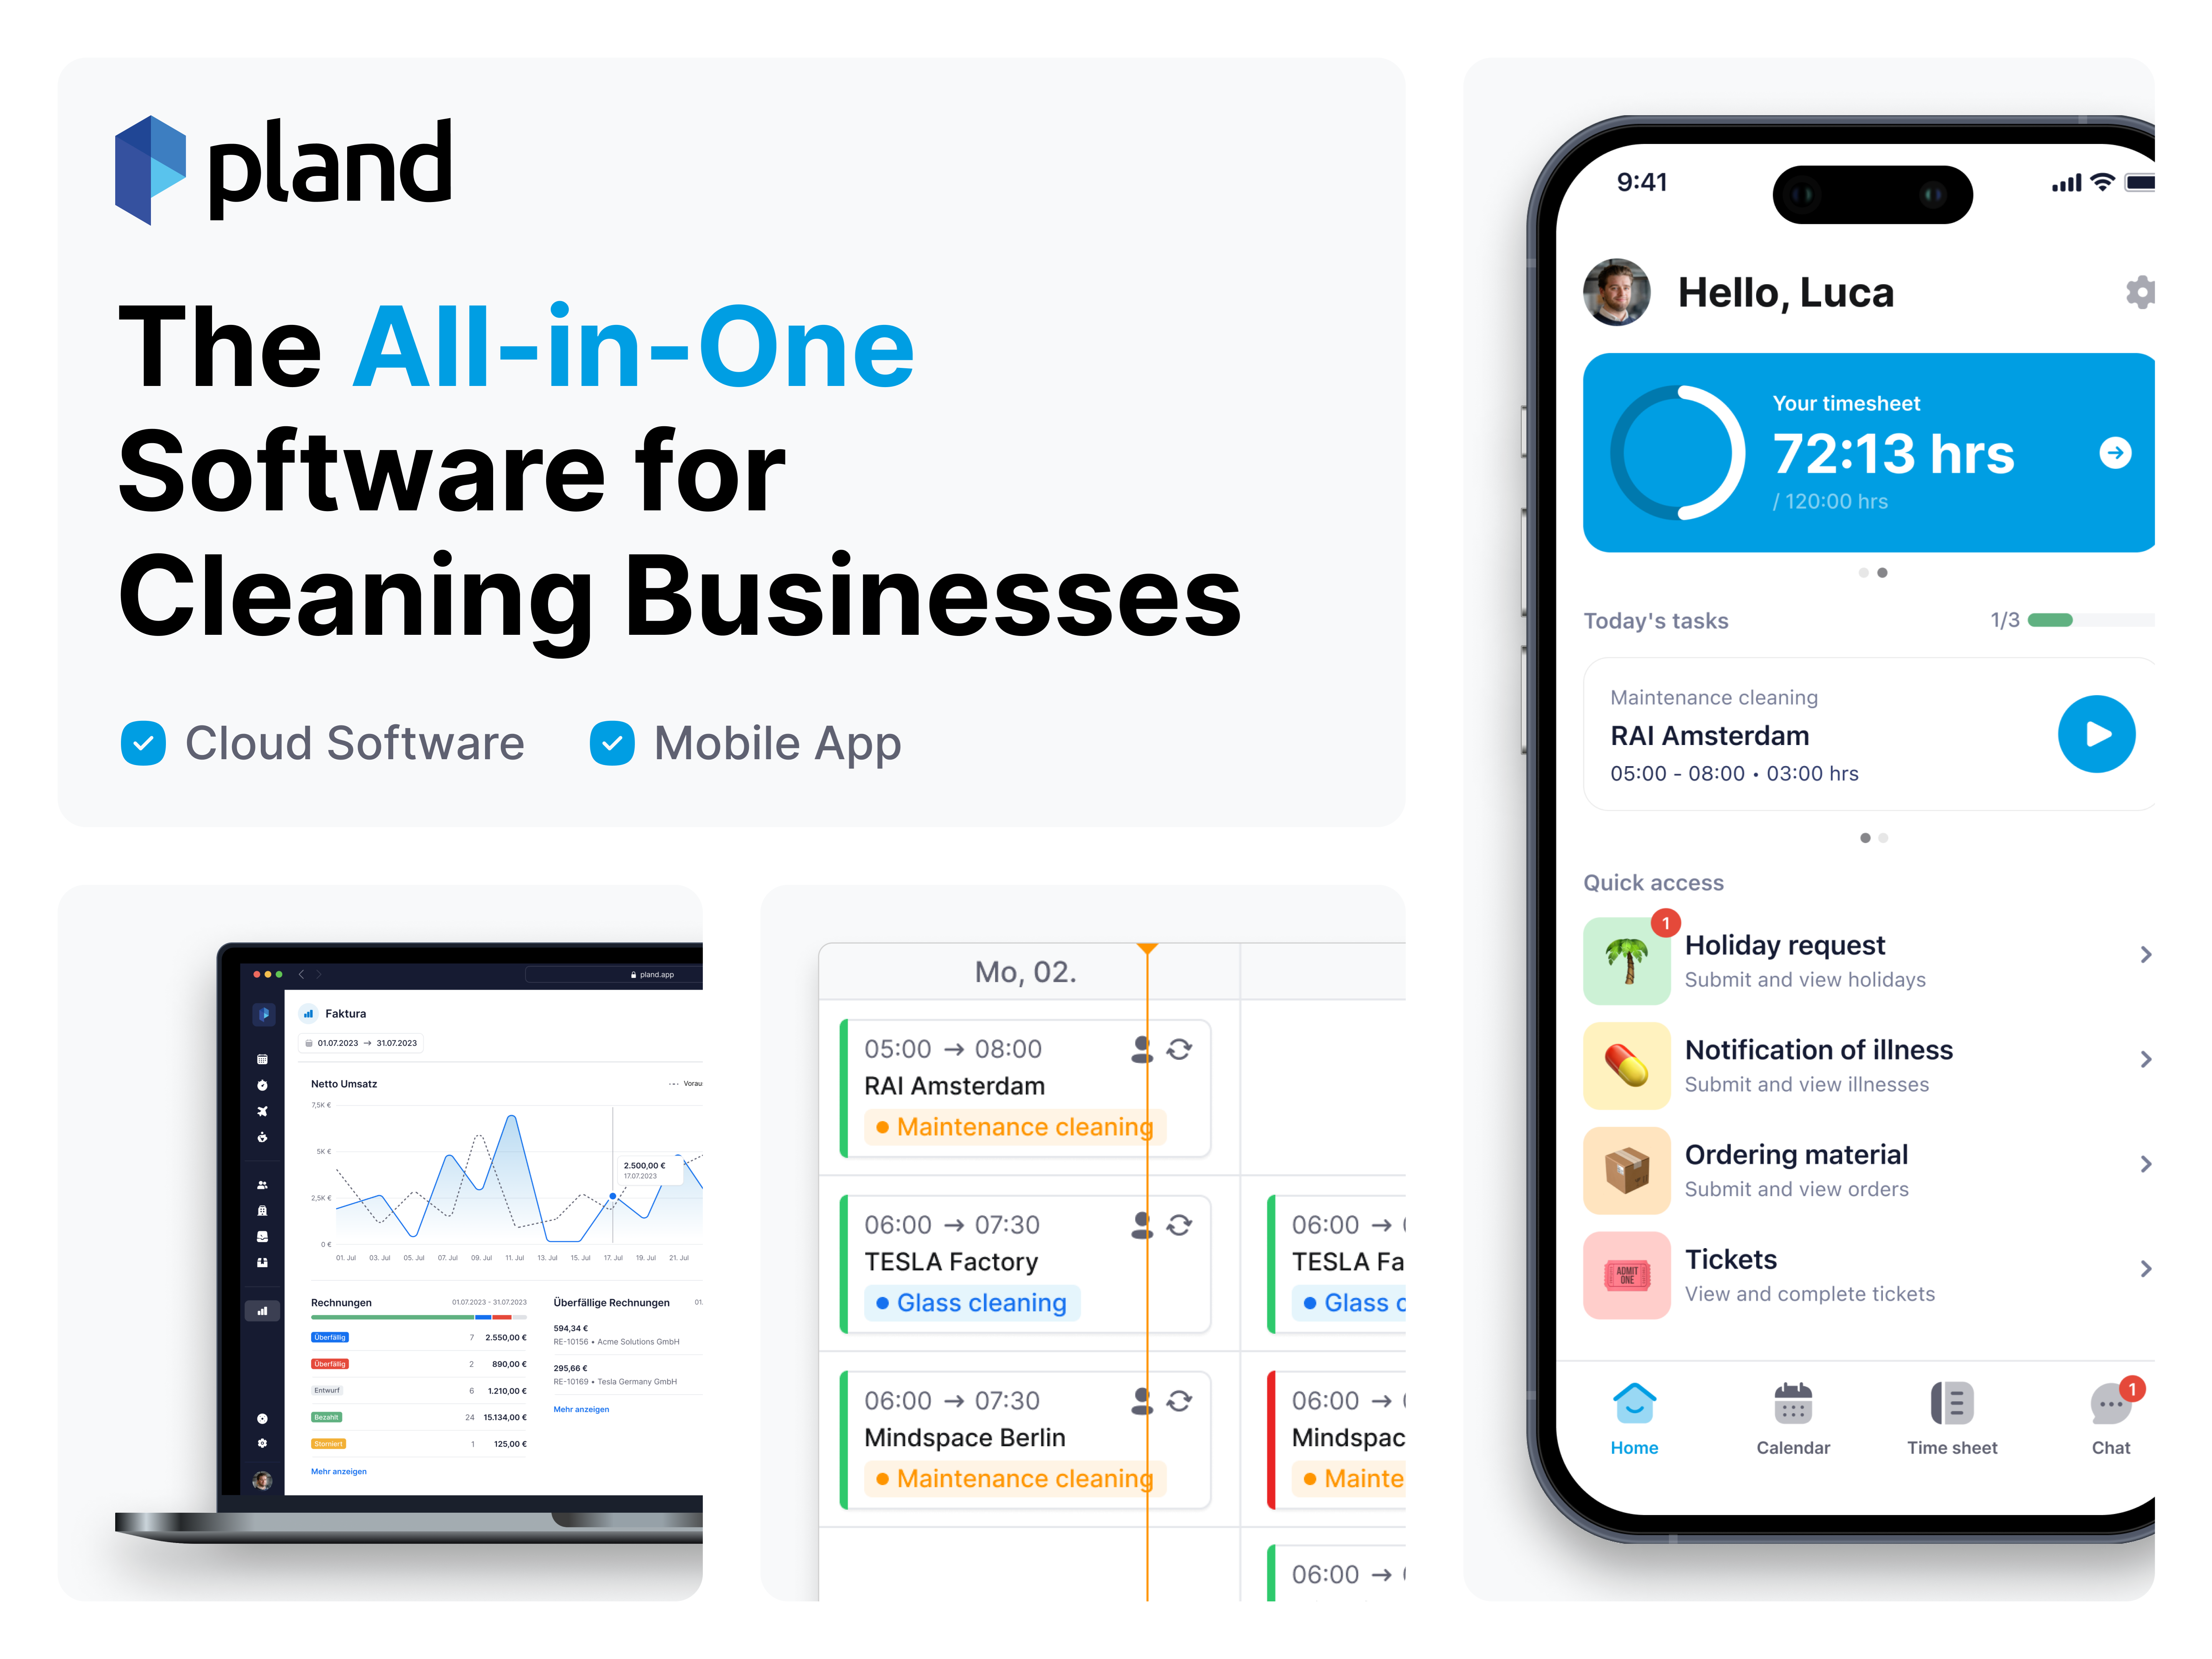 The All-in-One Software for Cleaning Businesses